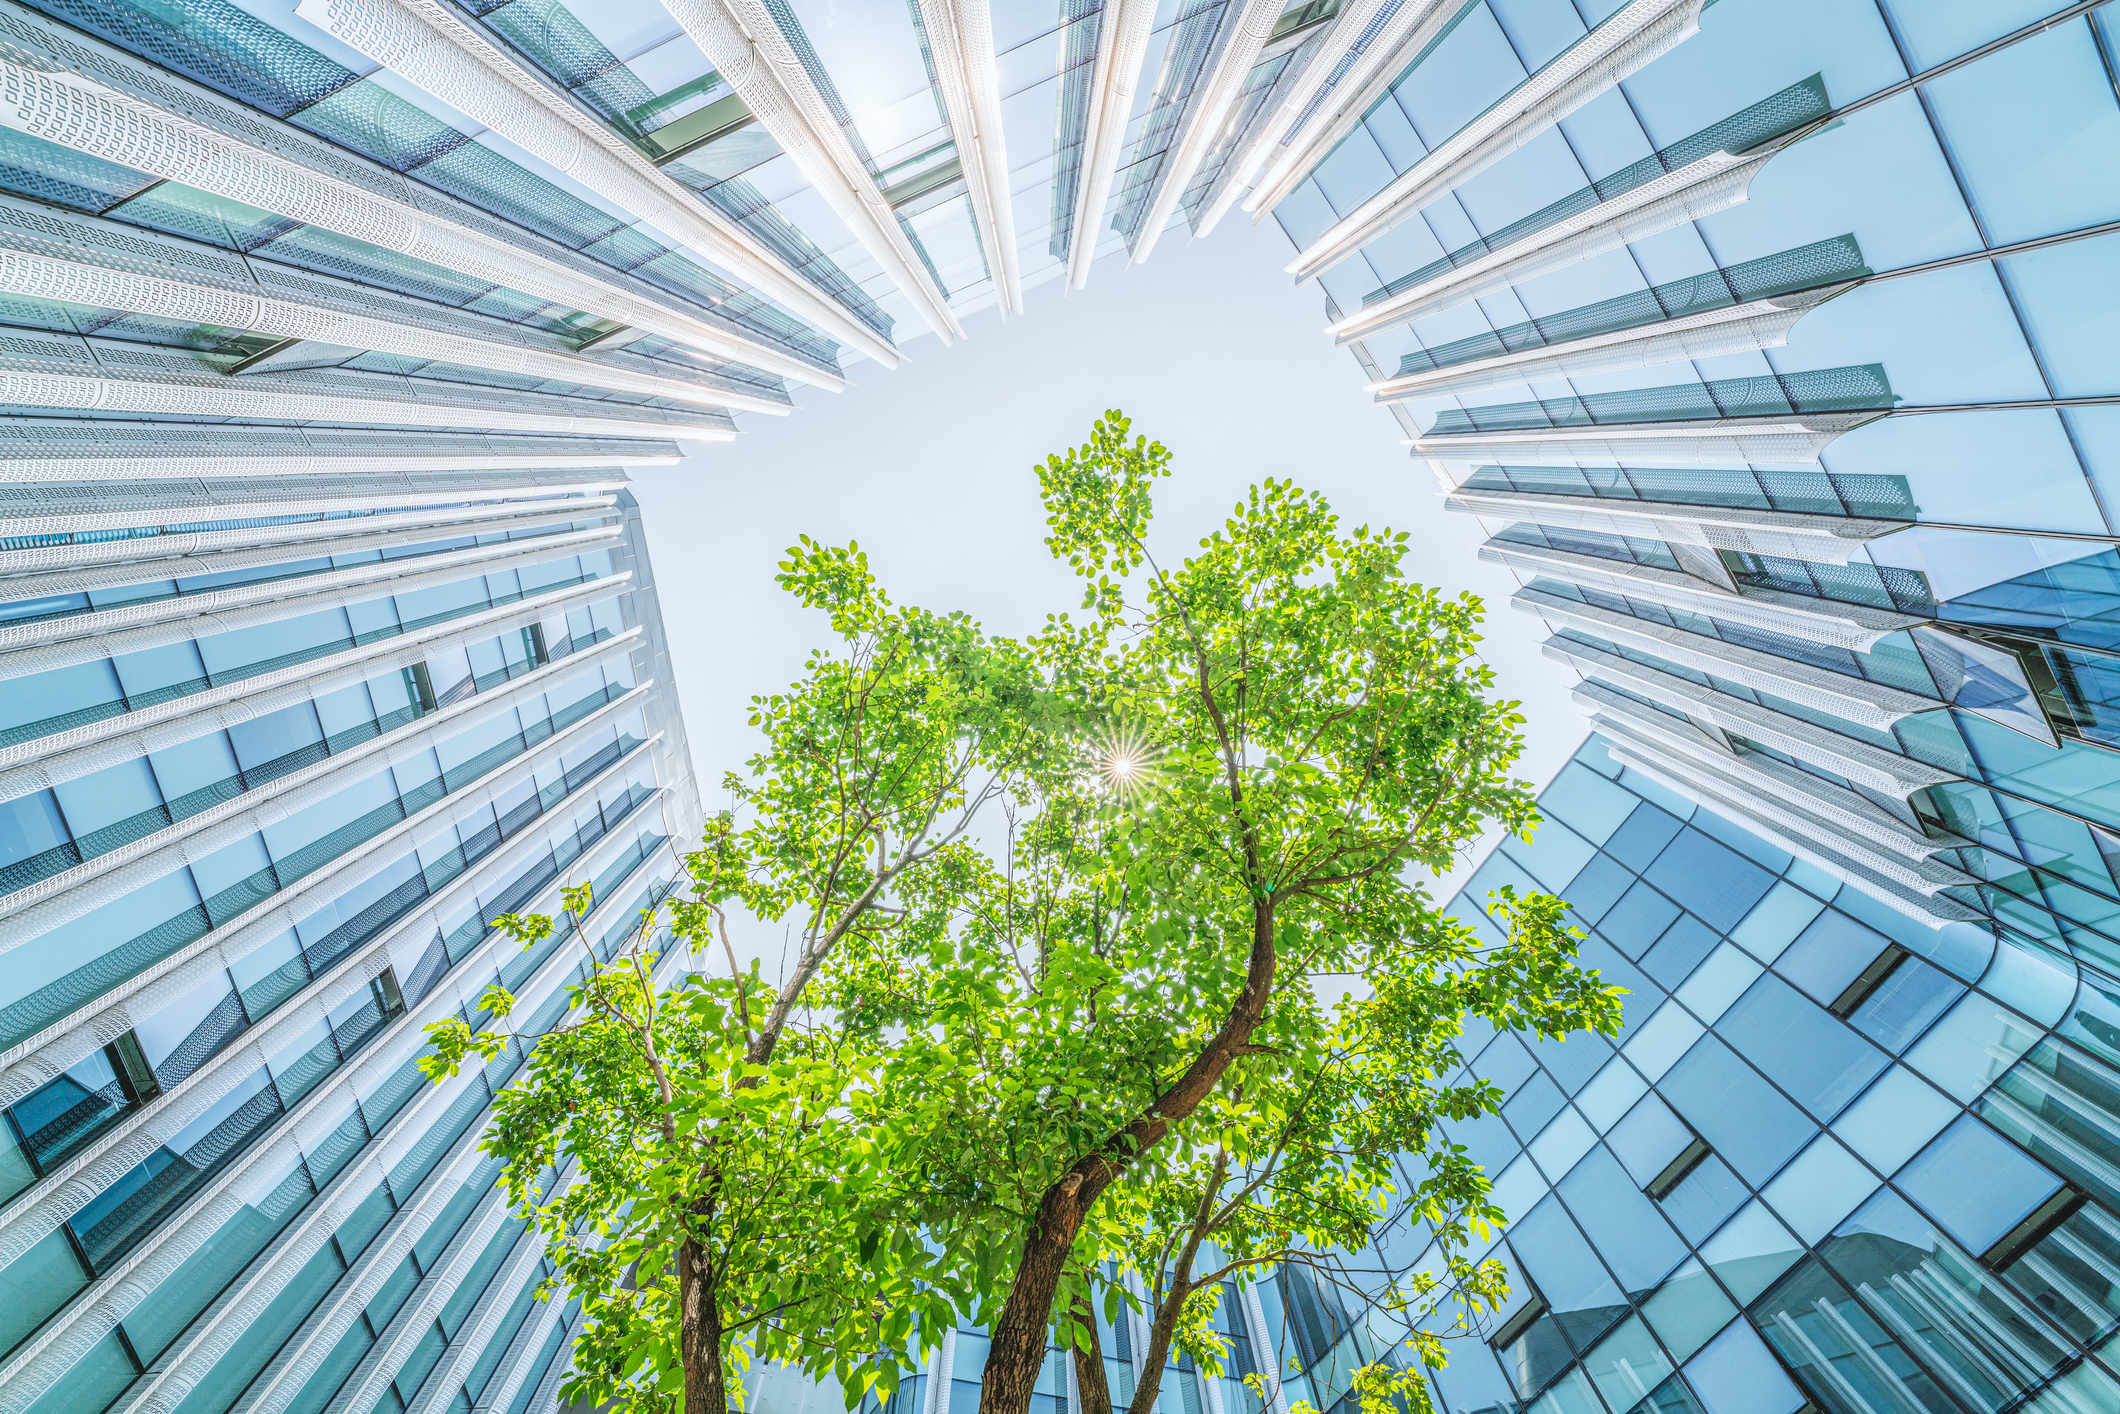 Sustainable Design Principles in Green Buildings